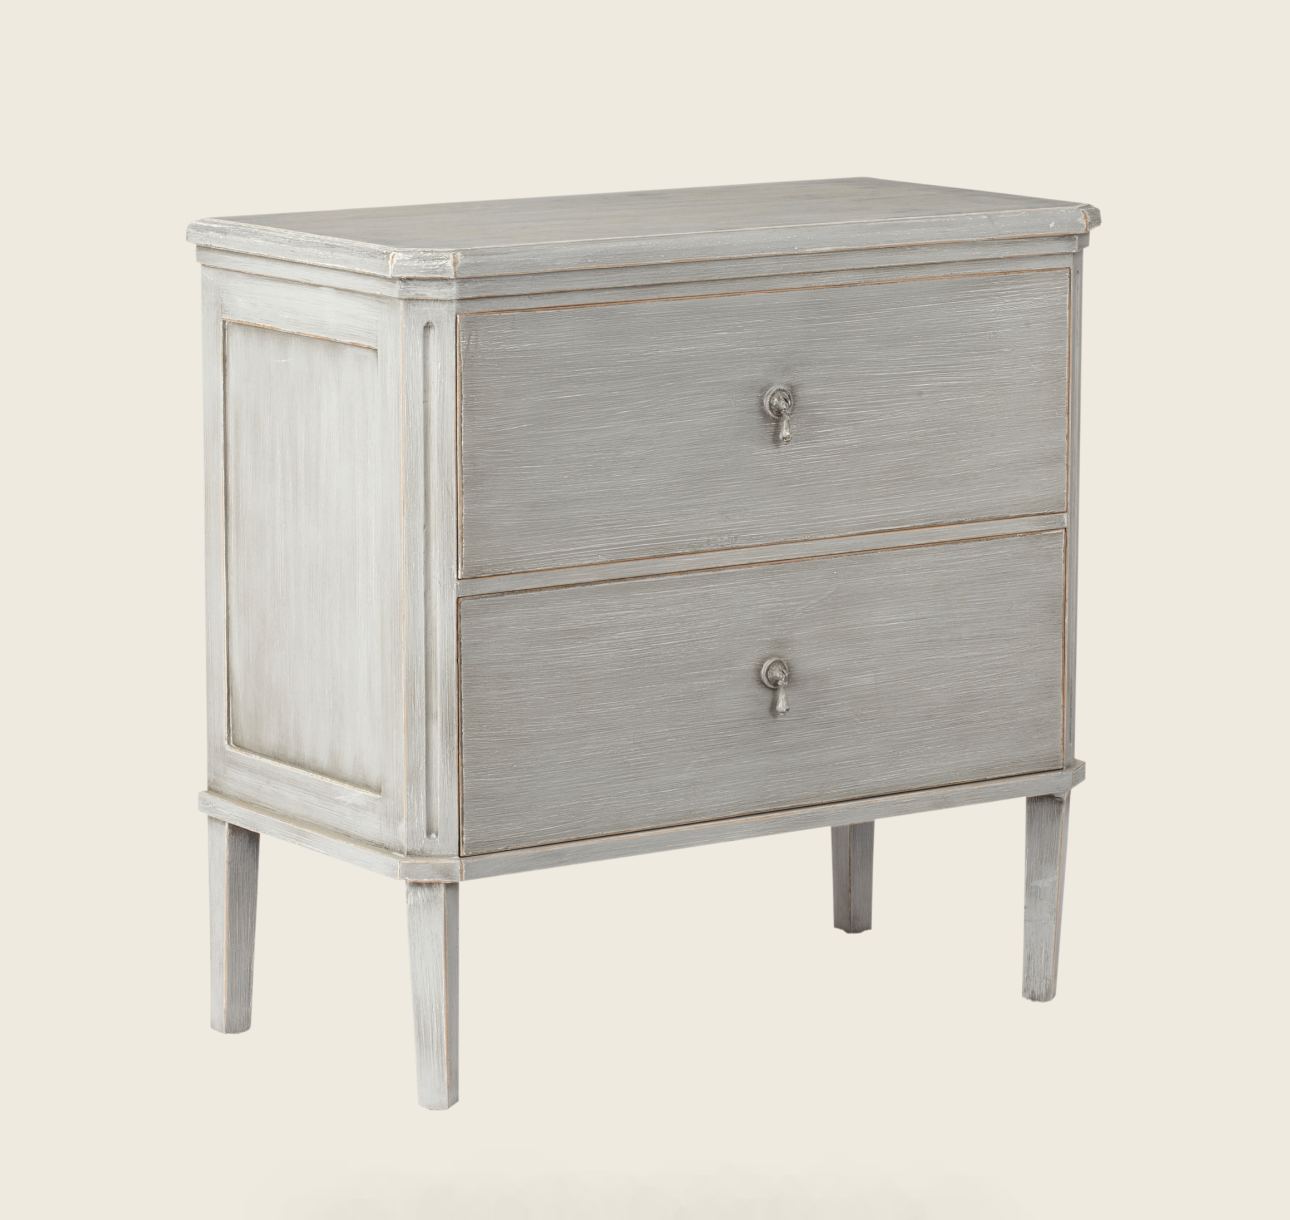 Oka Rocca Small Painted Wood Chest of Drawers - Gray